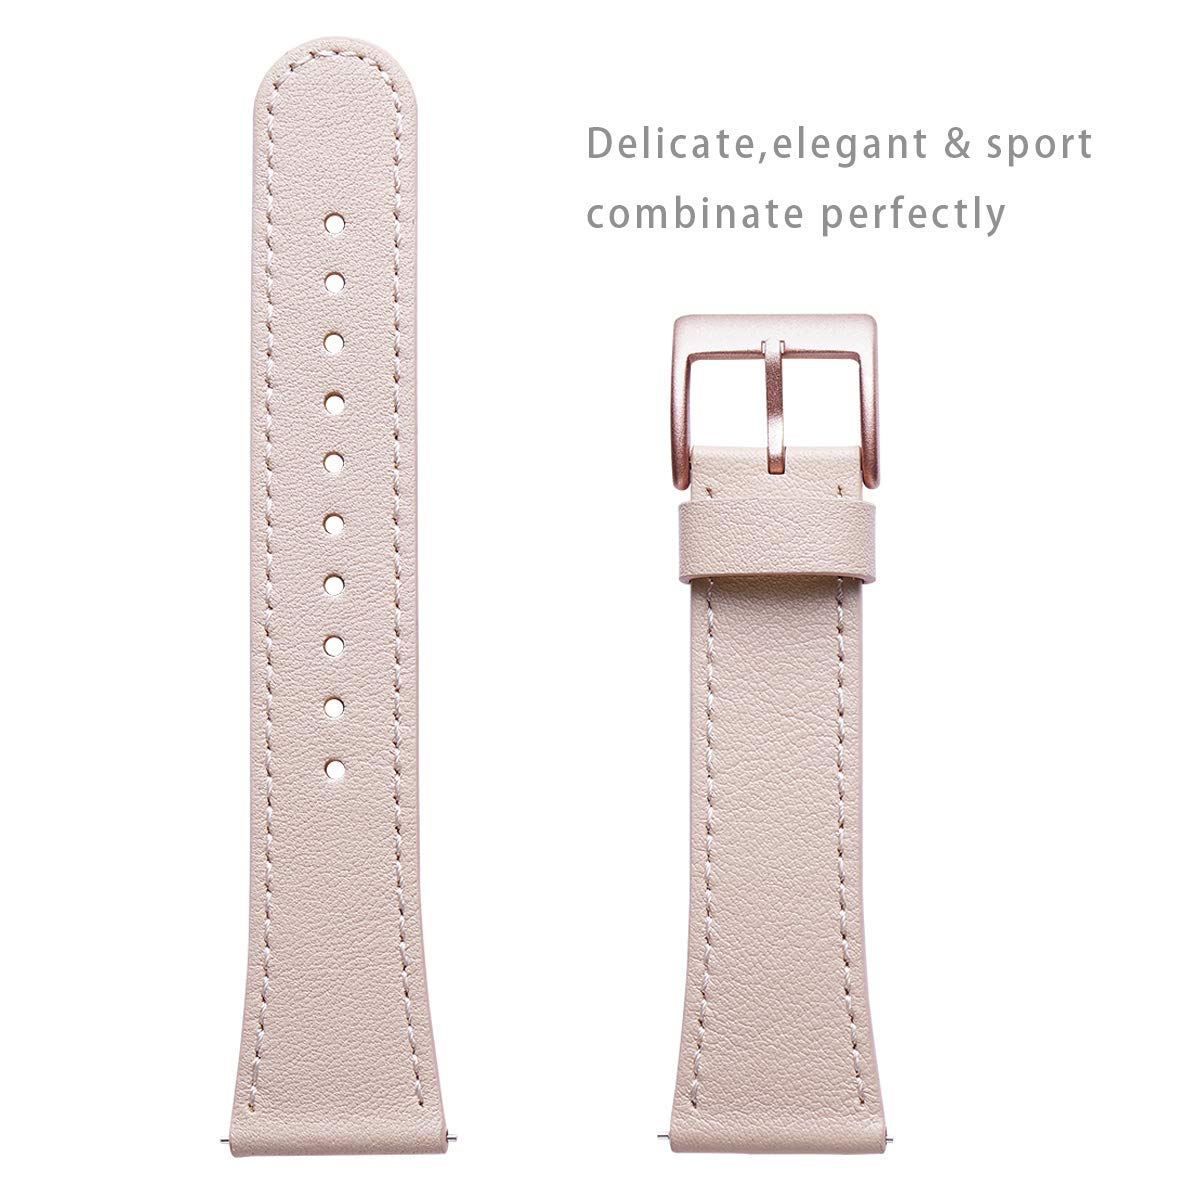 WFEAGL for Fitbit Versa Bands, Top Grain Leather Band Replacement Strap for Fitbit Versa/Versa 2 /Versa Lite/Versa SE Fitness Smart Watch (PinkSand Band+ Rosegold Buckle)